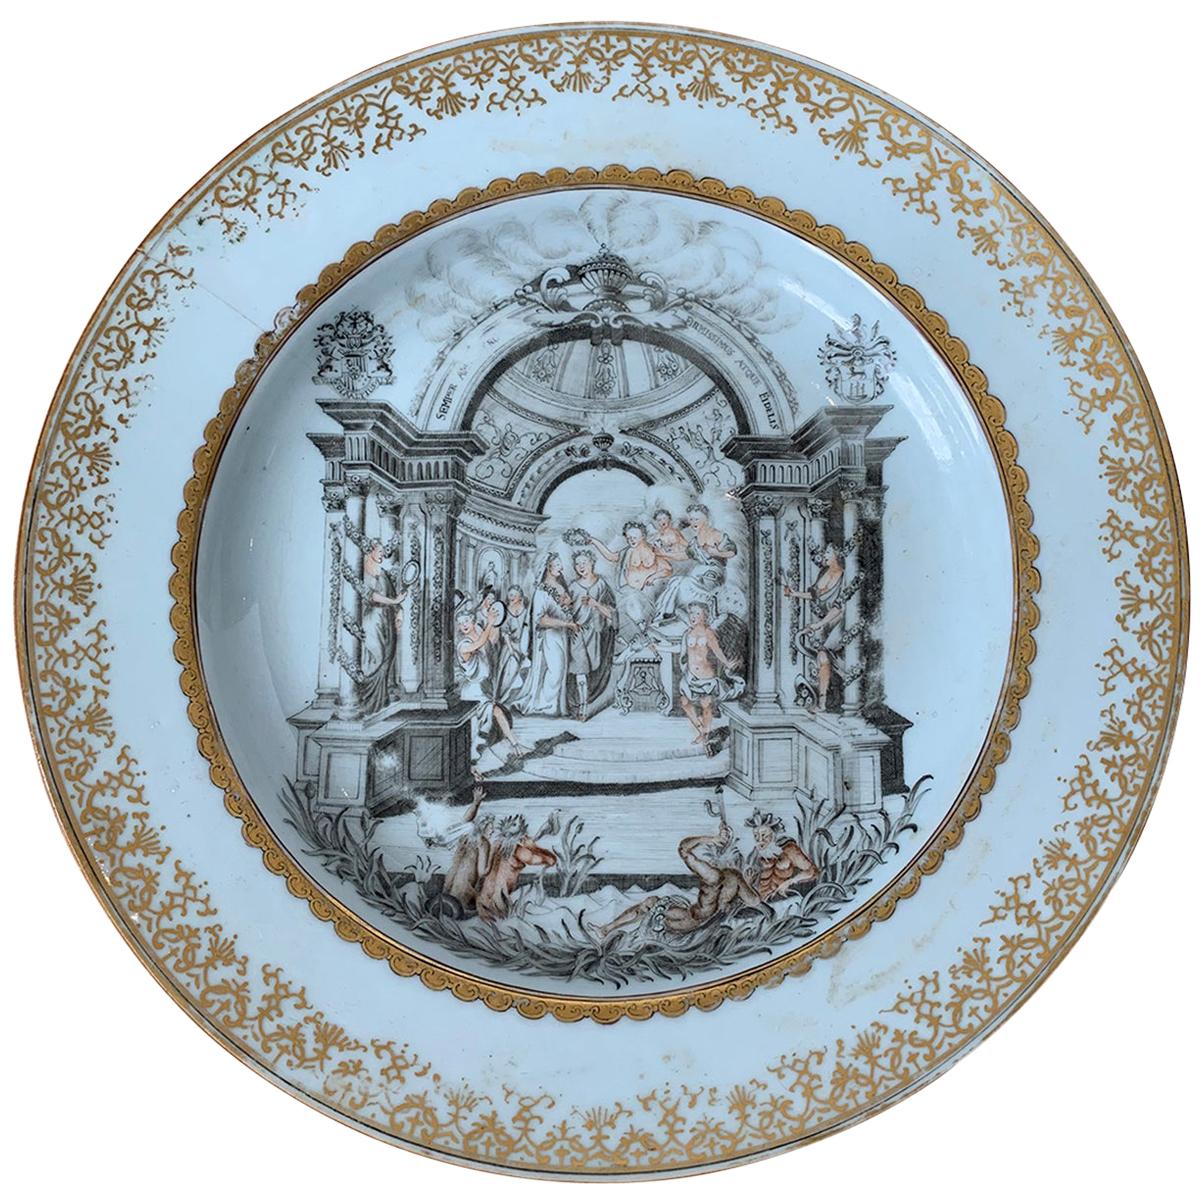 18th Century English Porcelain Marriage Plate with Two Dordrecht Family Crests